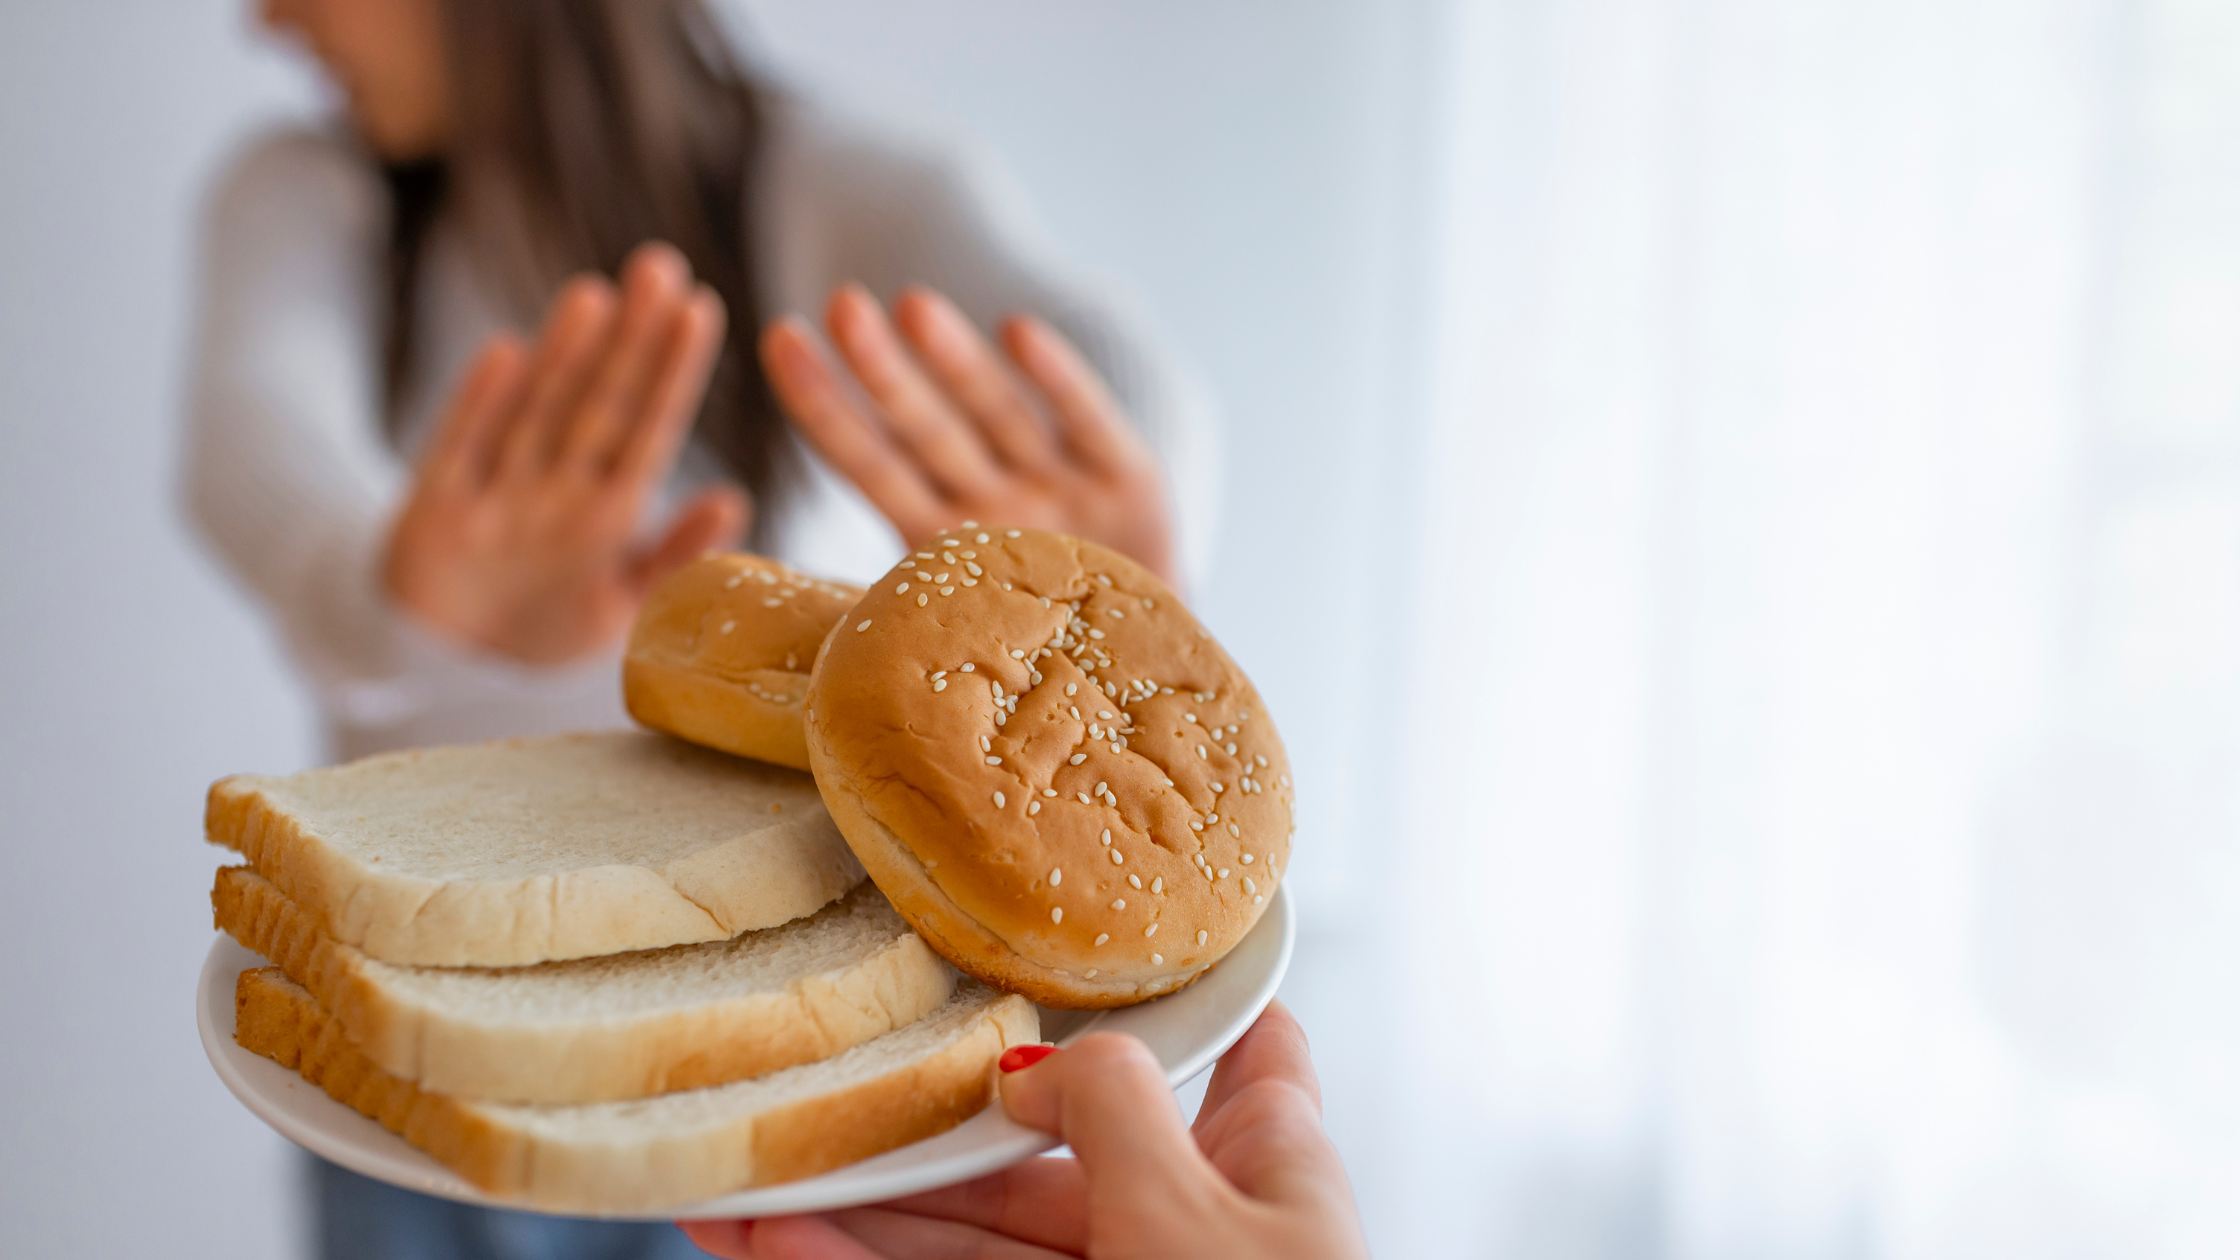 someone holds out their hands to decline a plate of bread and donuts